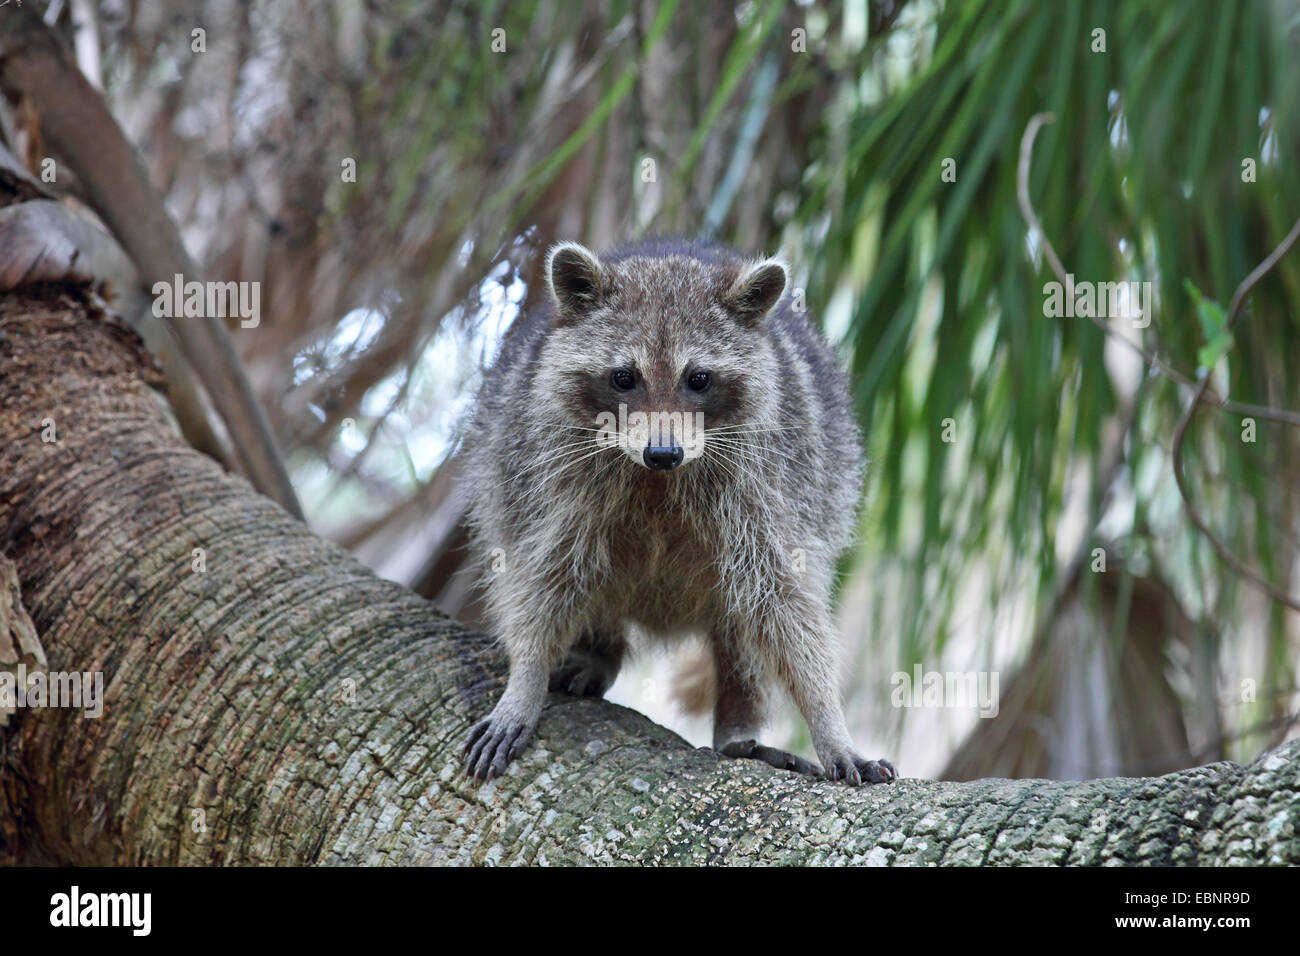 common raccoon (Procyon lotor), young racoon stands in a palm, USA, Florida, Fort de Soto Stock Photo